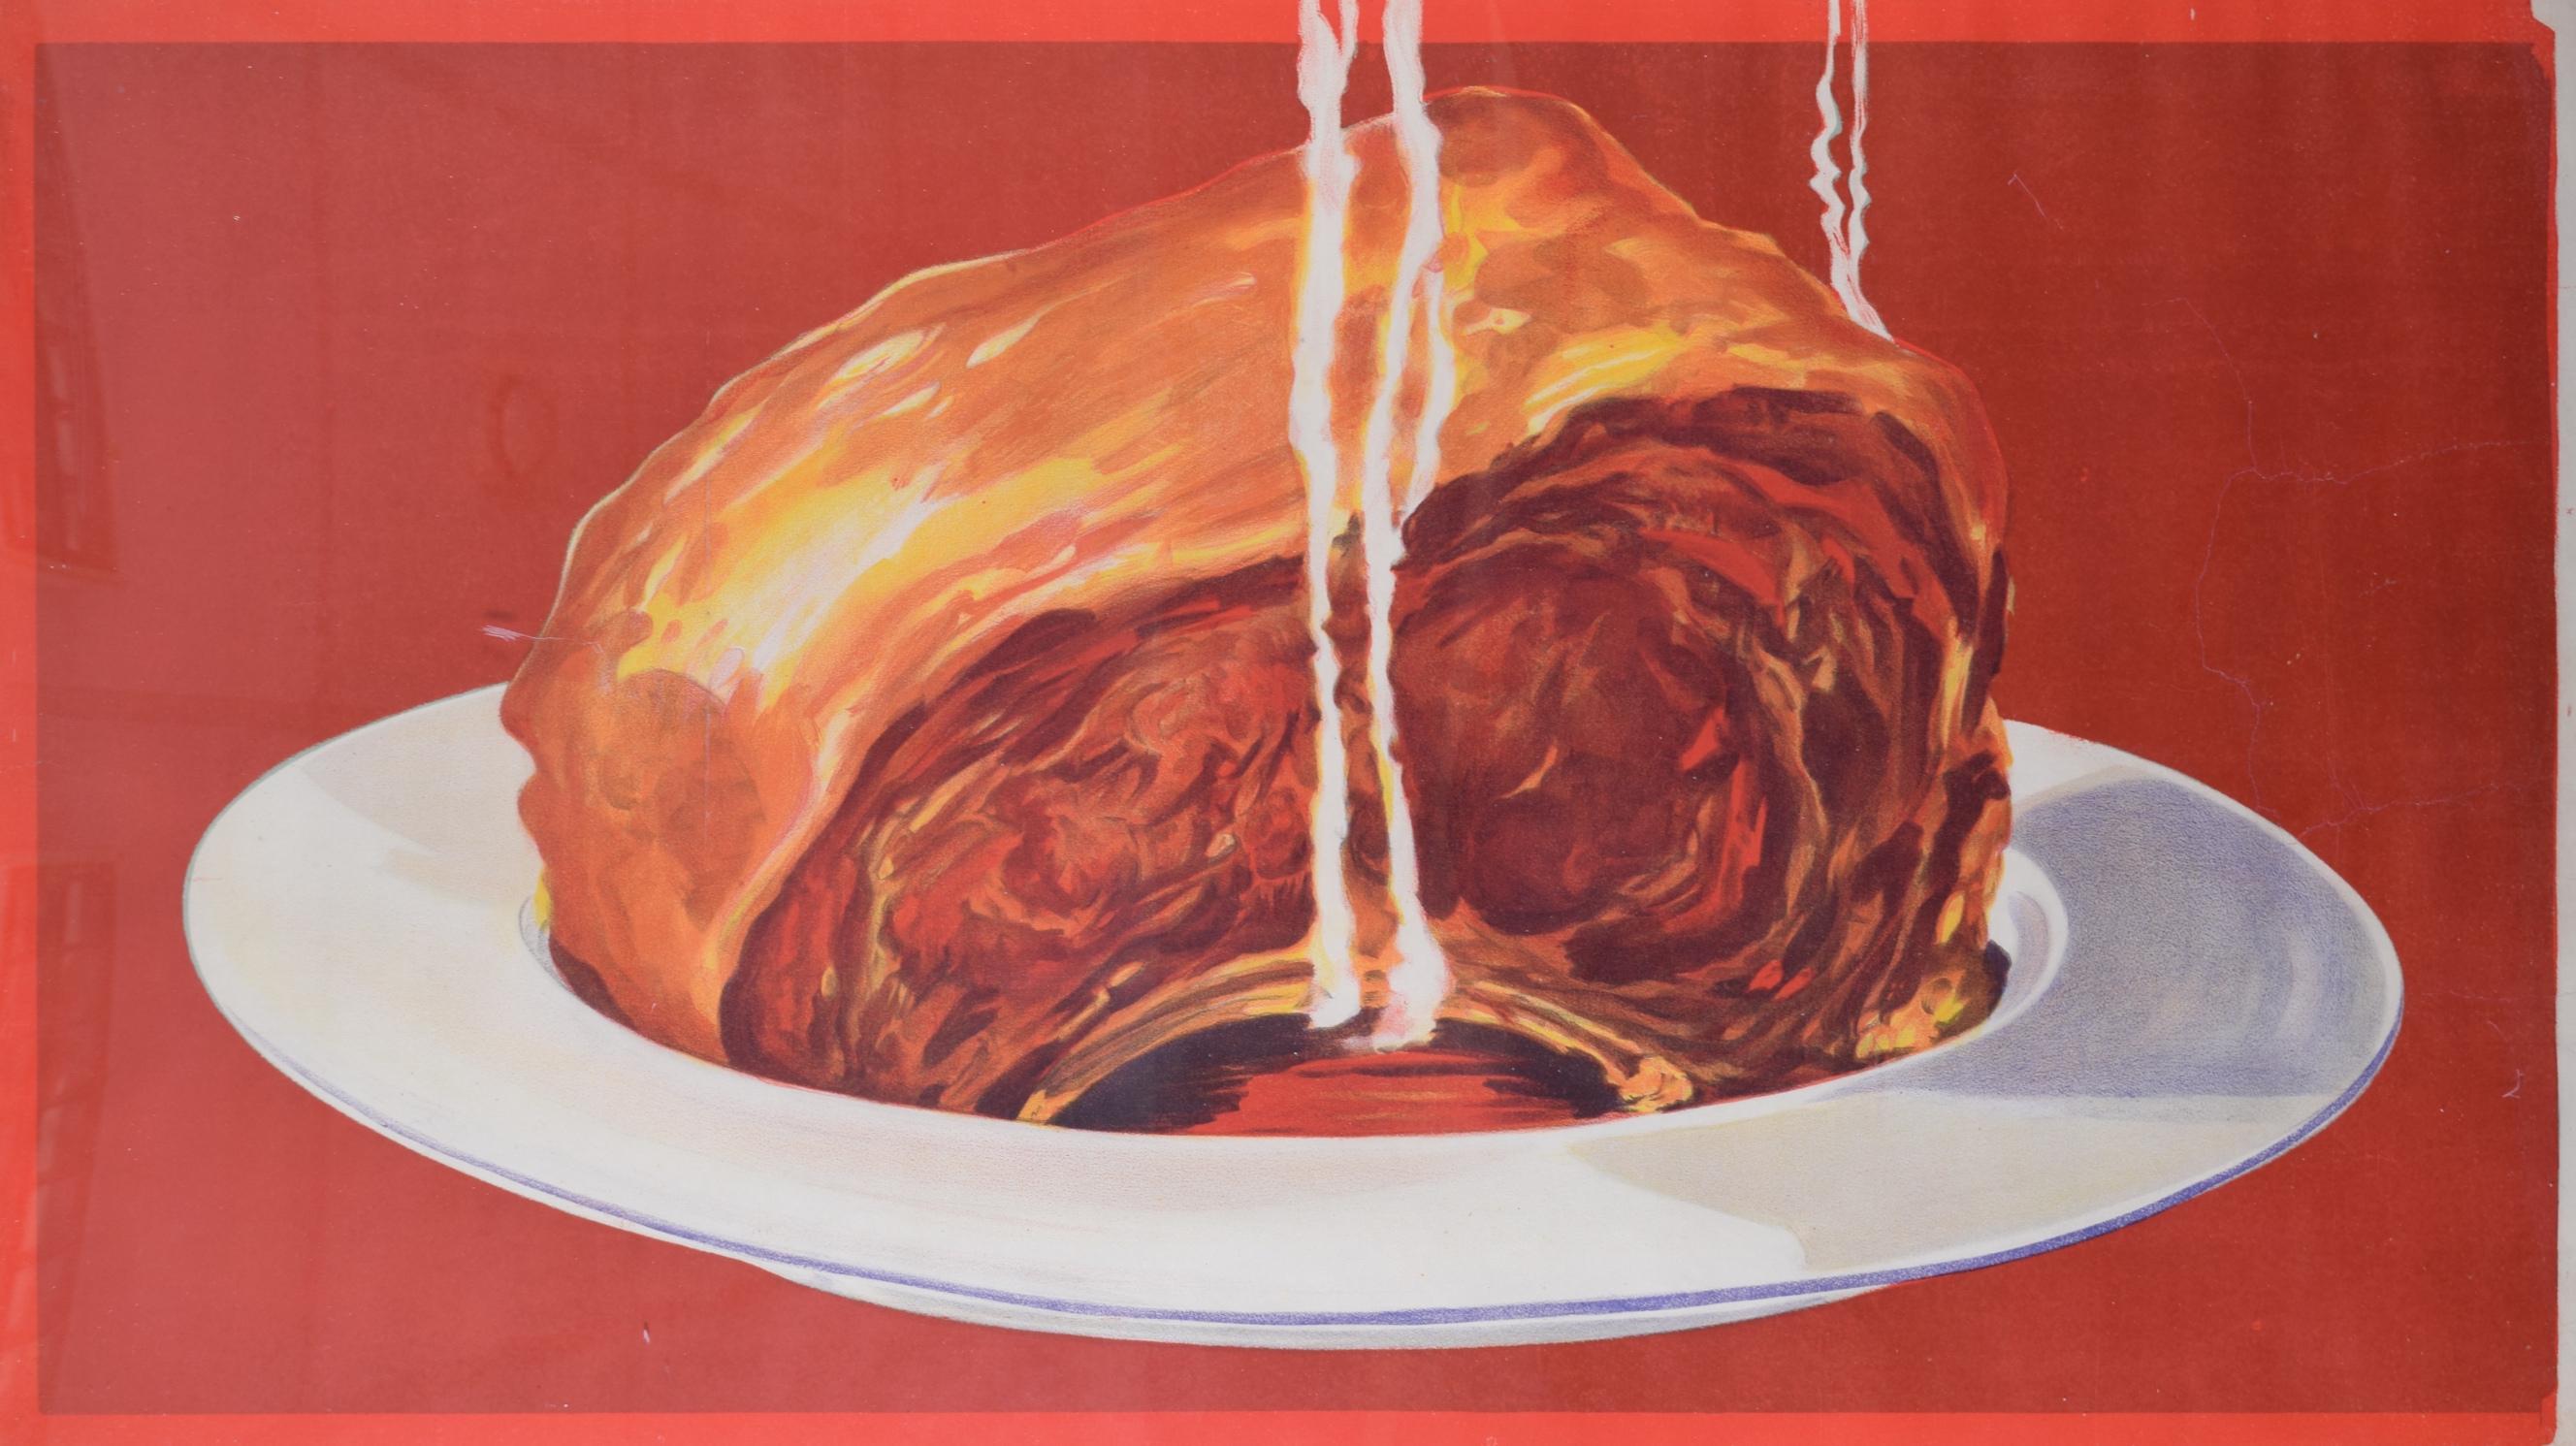 Rib of beef Bovril Bisto red original vintage poster - Print by Unknown